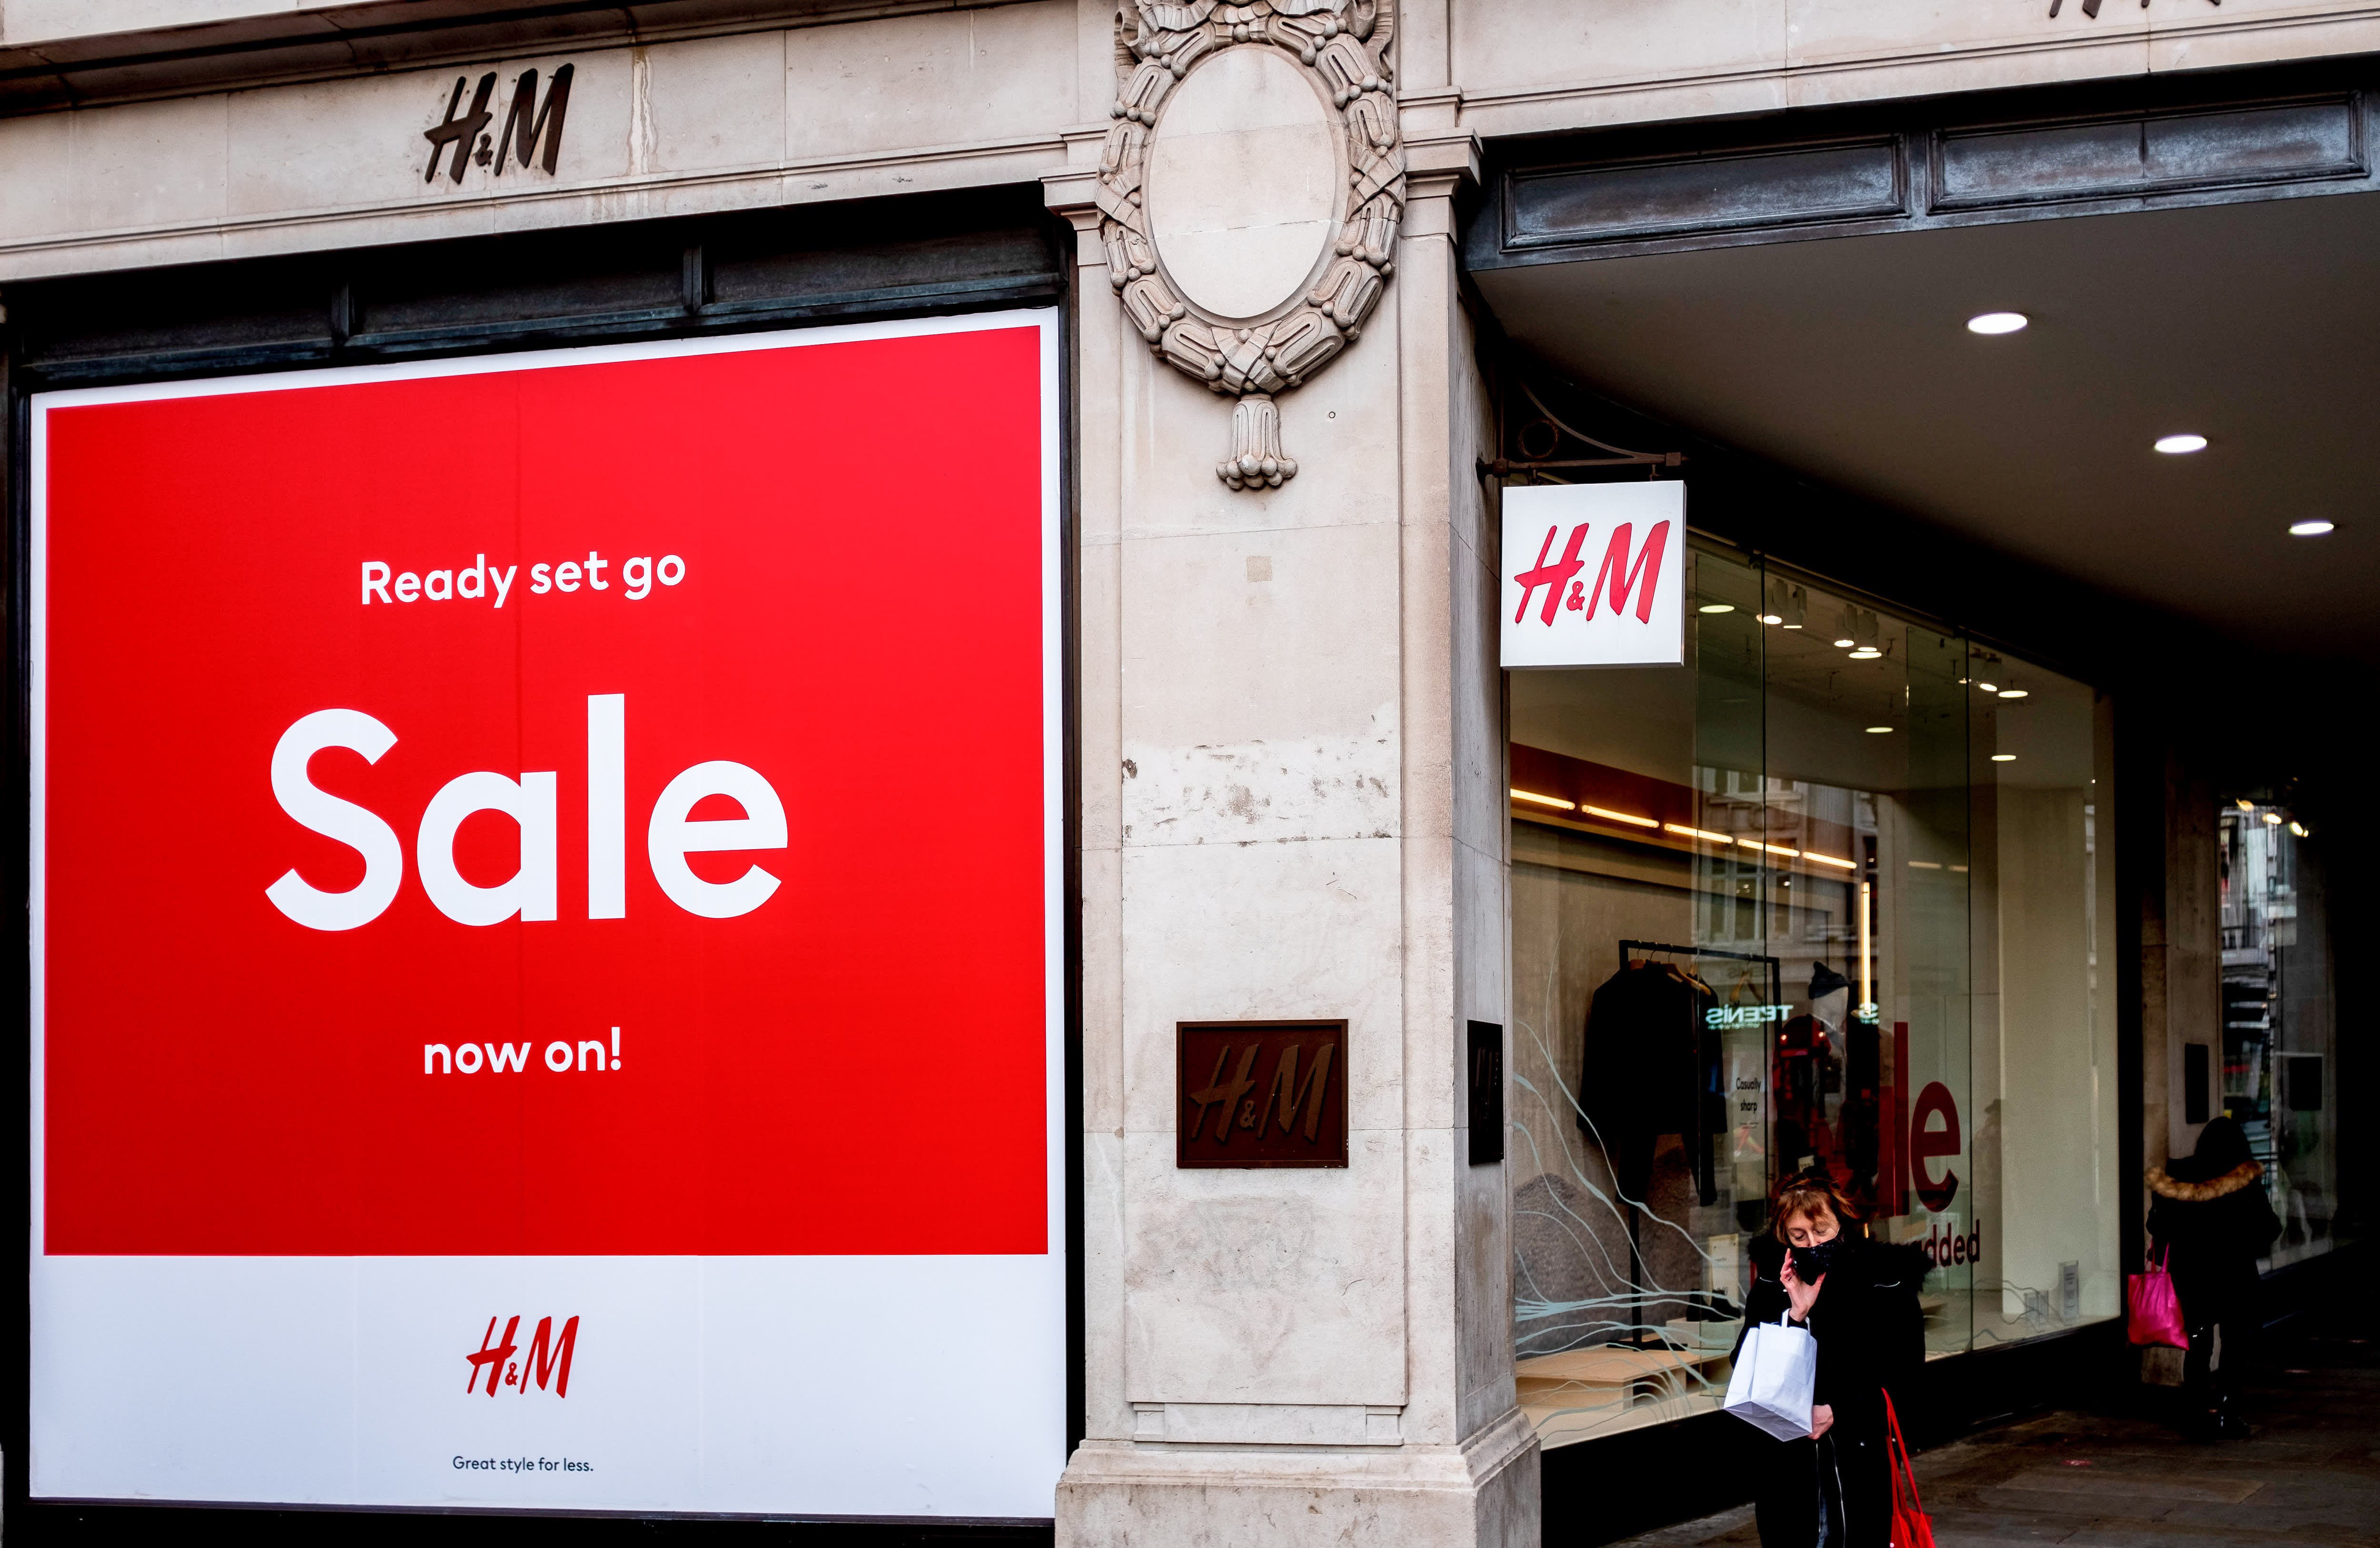 H&M Faces Sales Setback in Q4 as Inditex Dominates, But Profit Margin Strategy Shows Promise